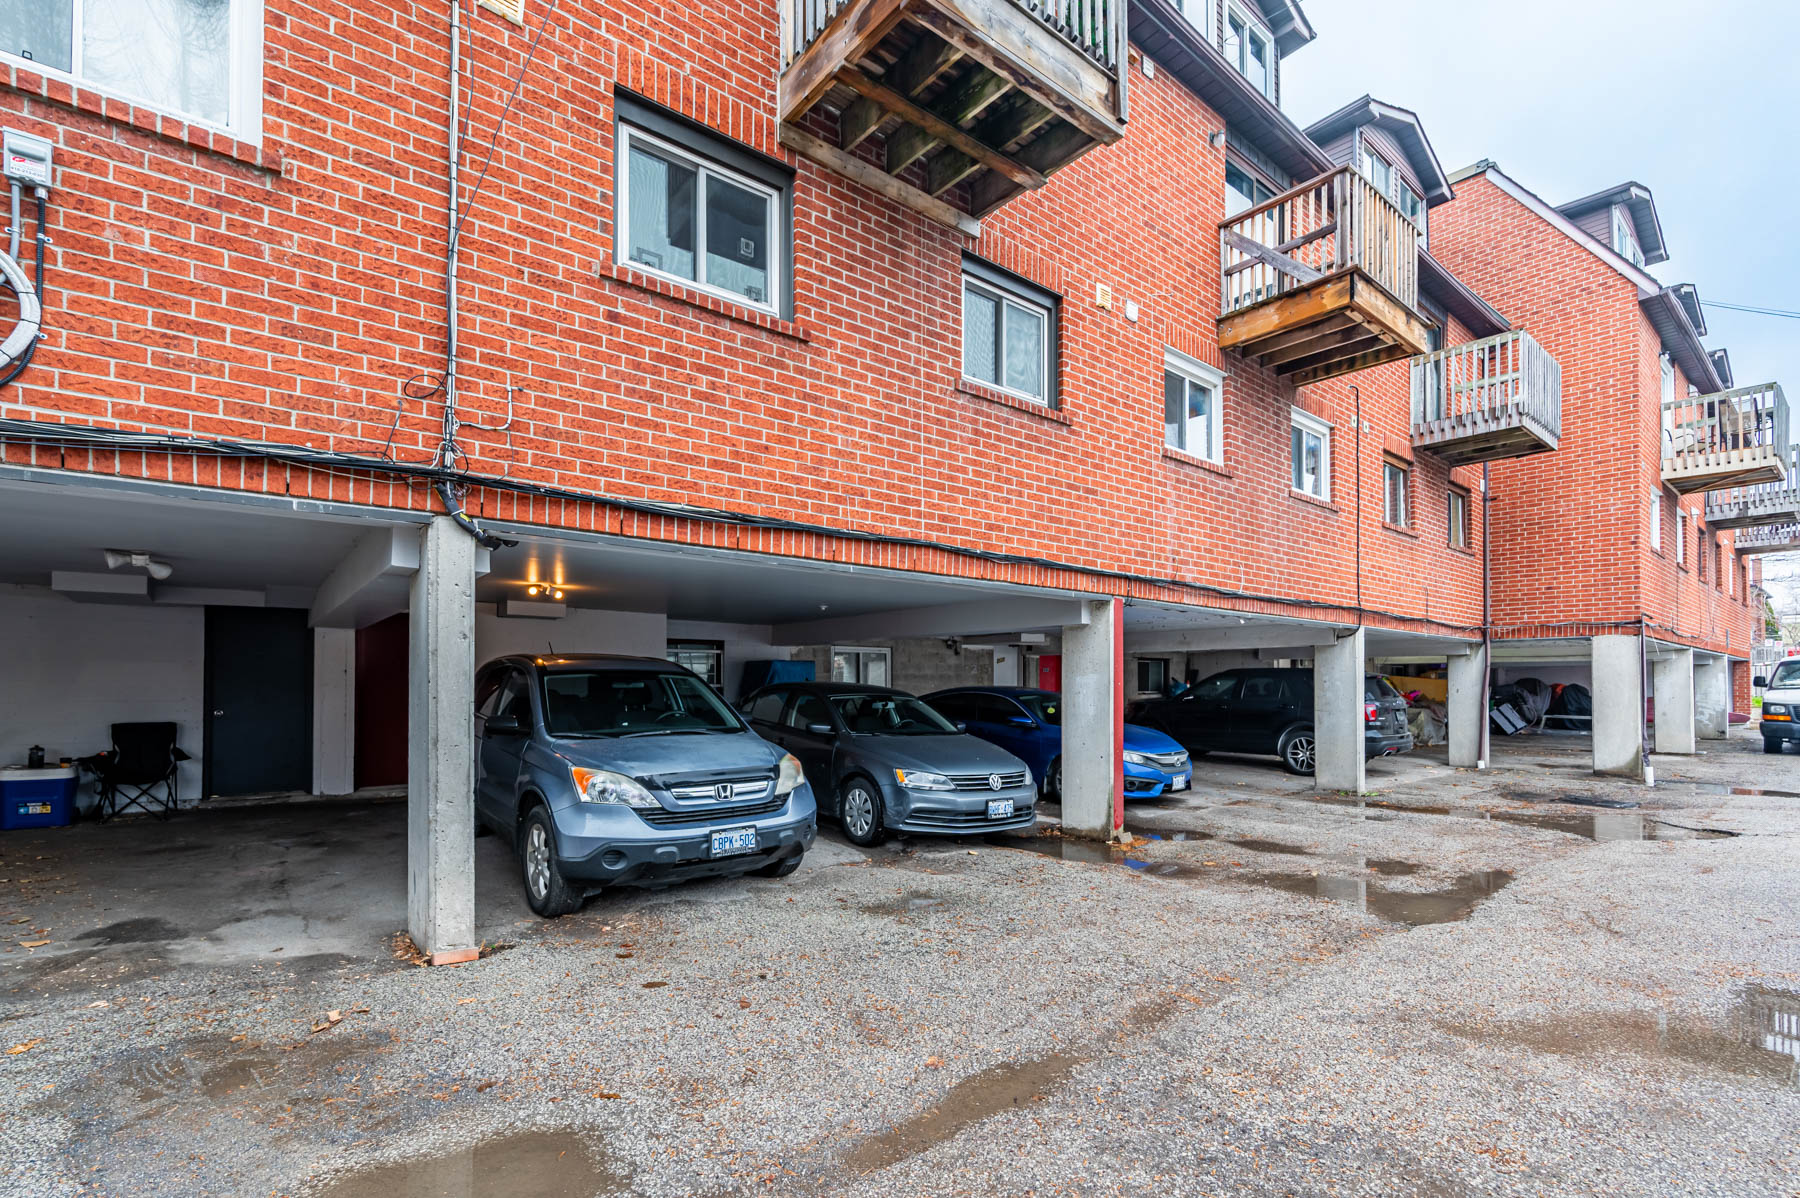 Red-brick building carport with vehicles parked below.